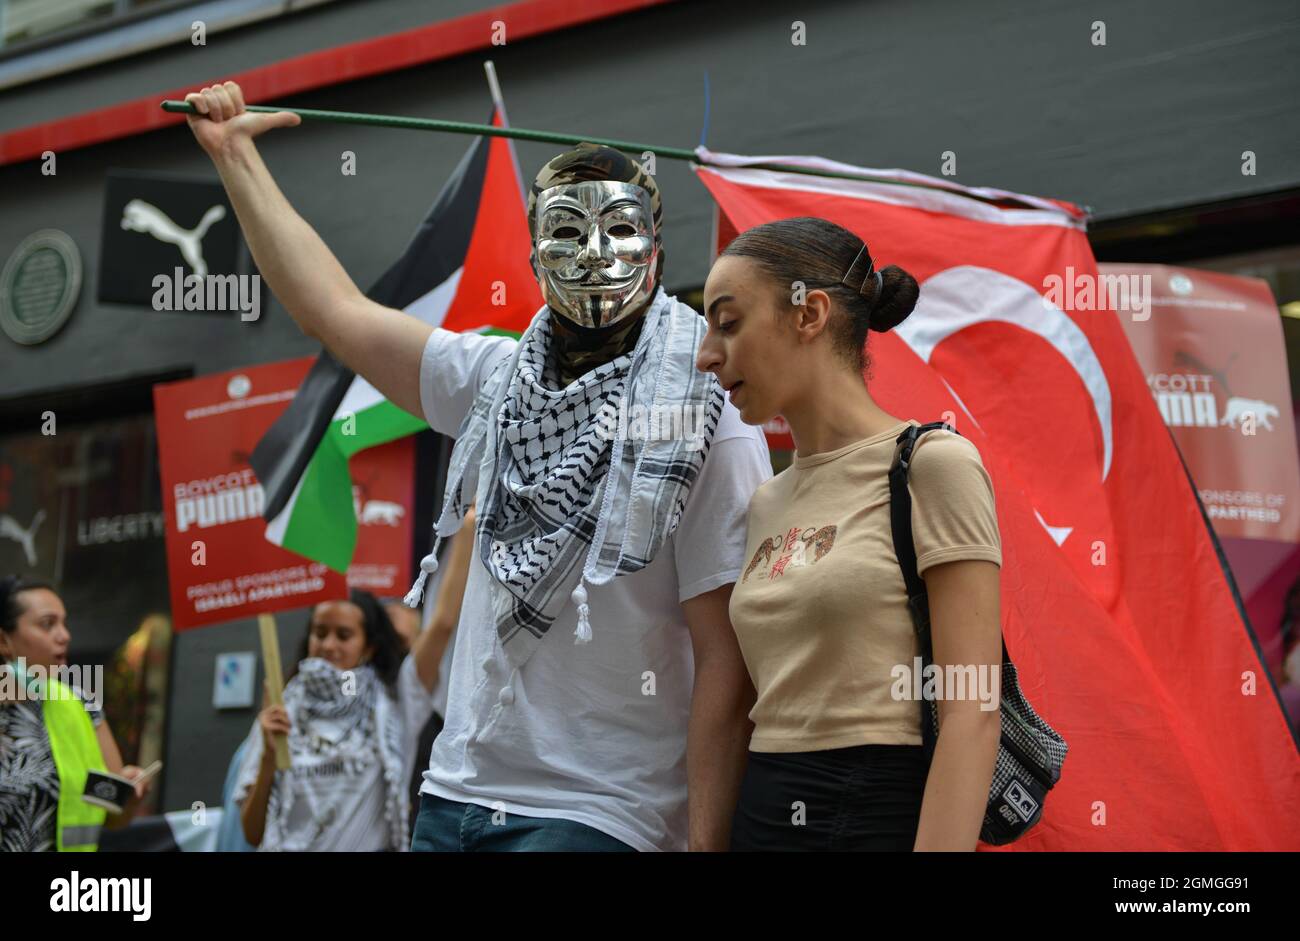 Two protesters with a Turkish flag during the demonstration.Boycott Puma protest organised by Palestine Solidarity Campaign and FOA (Friends of Al Aqsa) at Puma flagship store on Carnaby Street, London. Activists demonstrated against Puma's sponsorship of the IFA (Israel Football Association). (Photo by Thomas Krych / SOPA Images/Sipa USA) Stock Photo